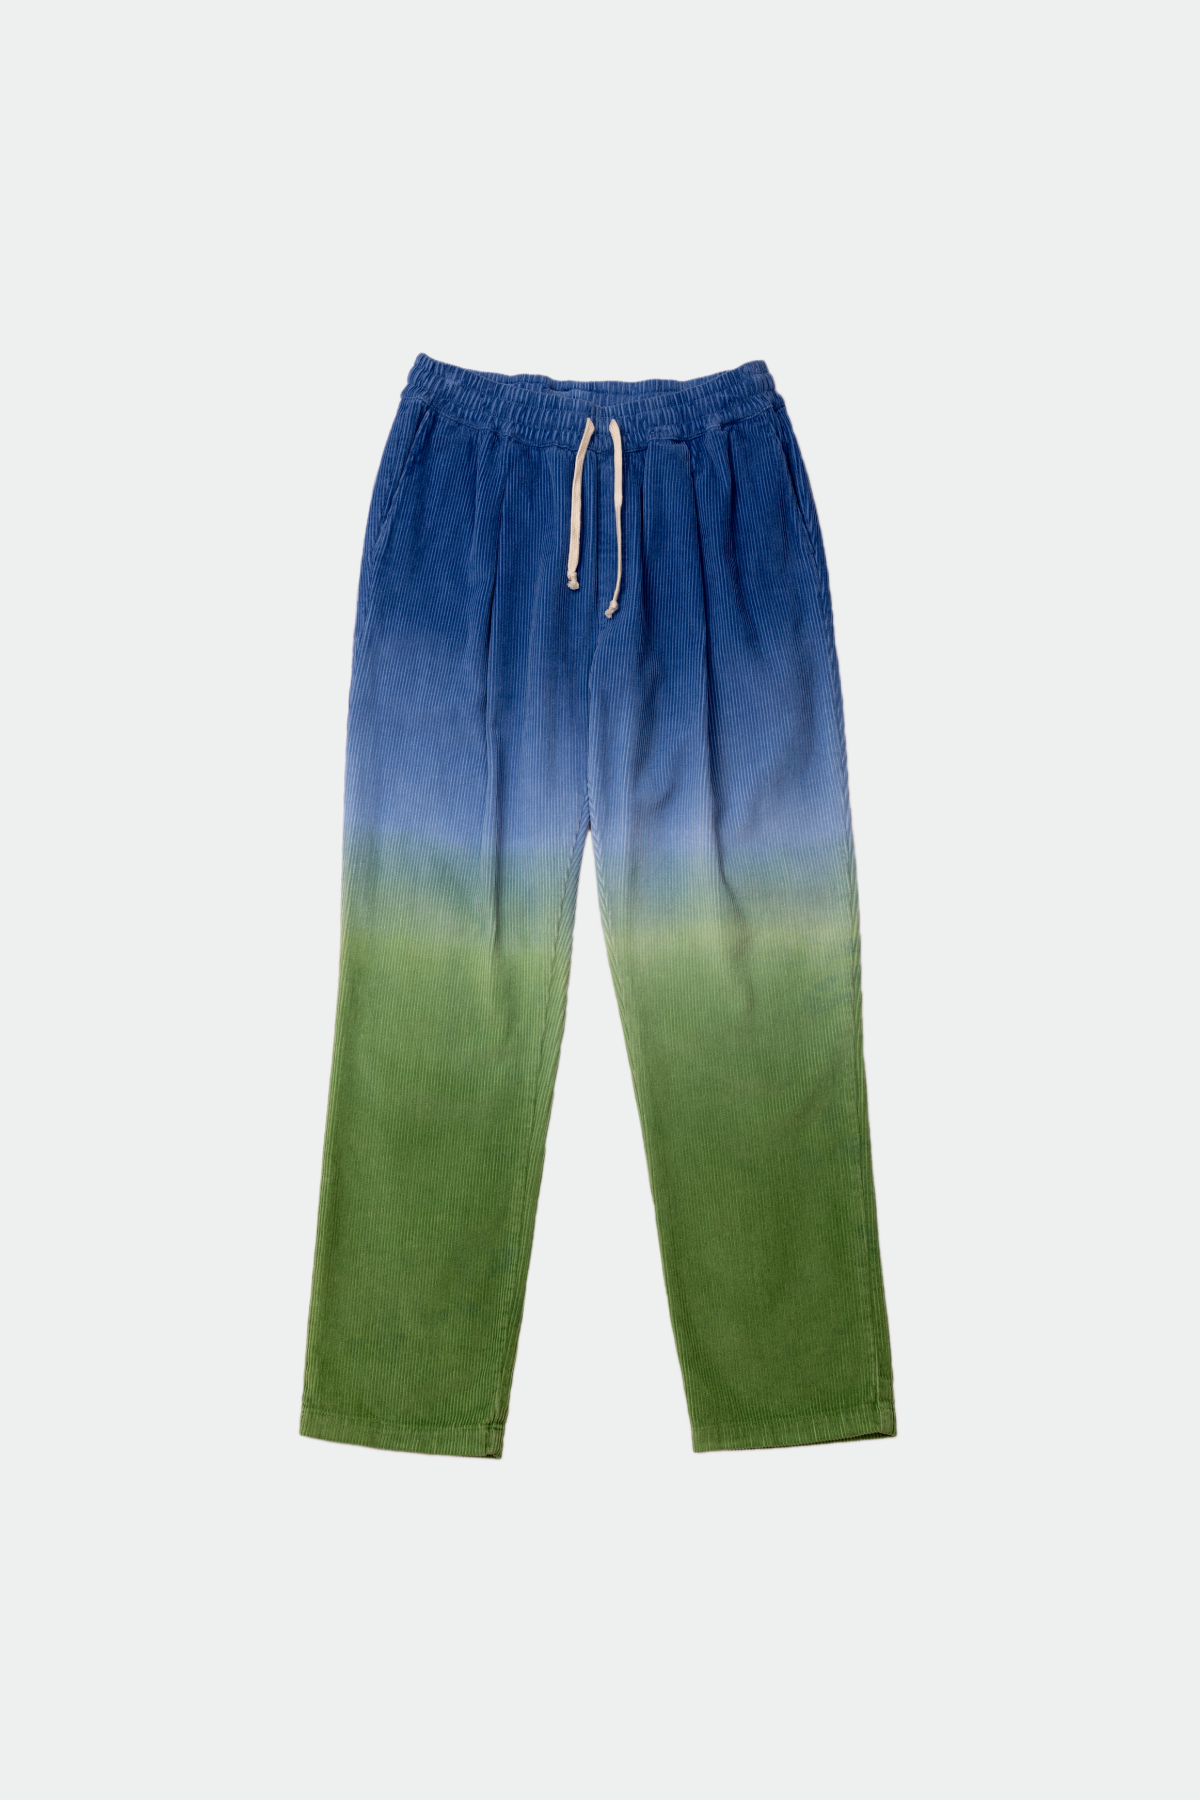 LIMTED EDITION PANTS CORDS GRADIENT TURTLE GREEN & STEEL BLUE